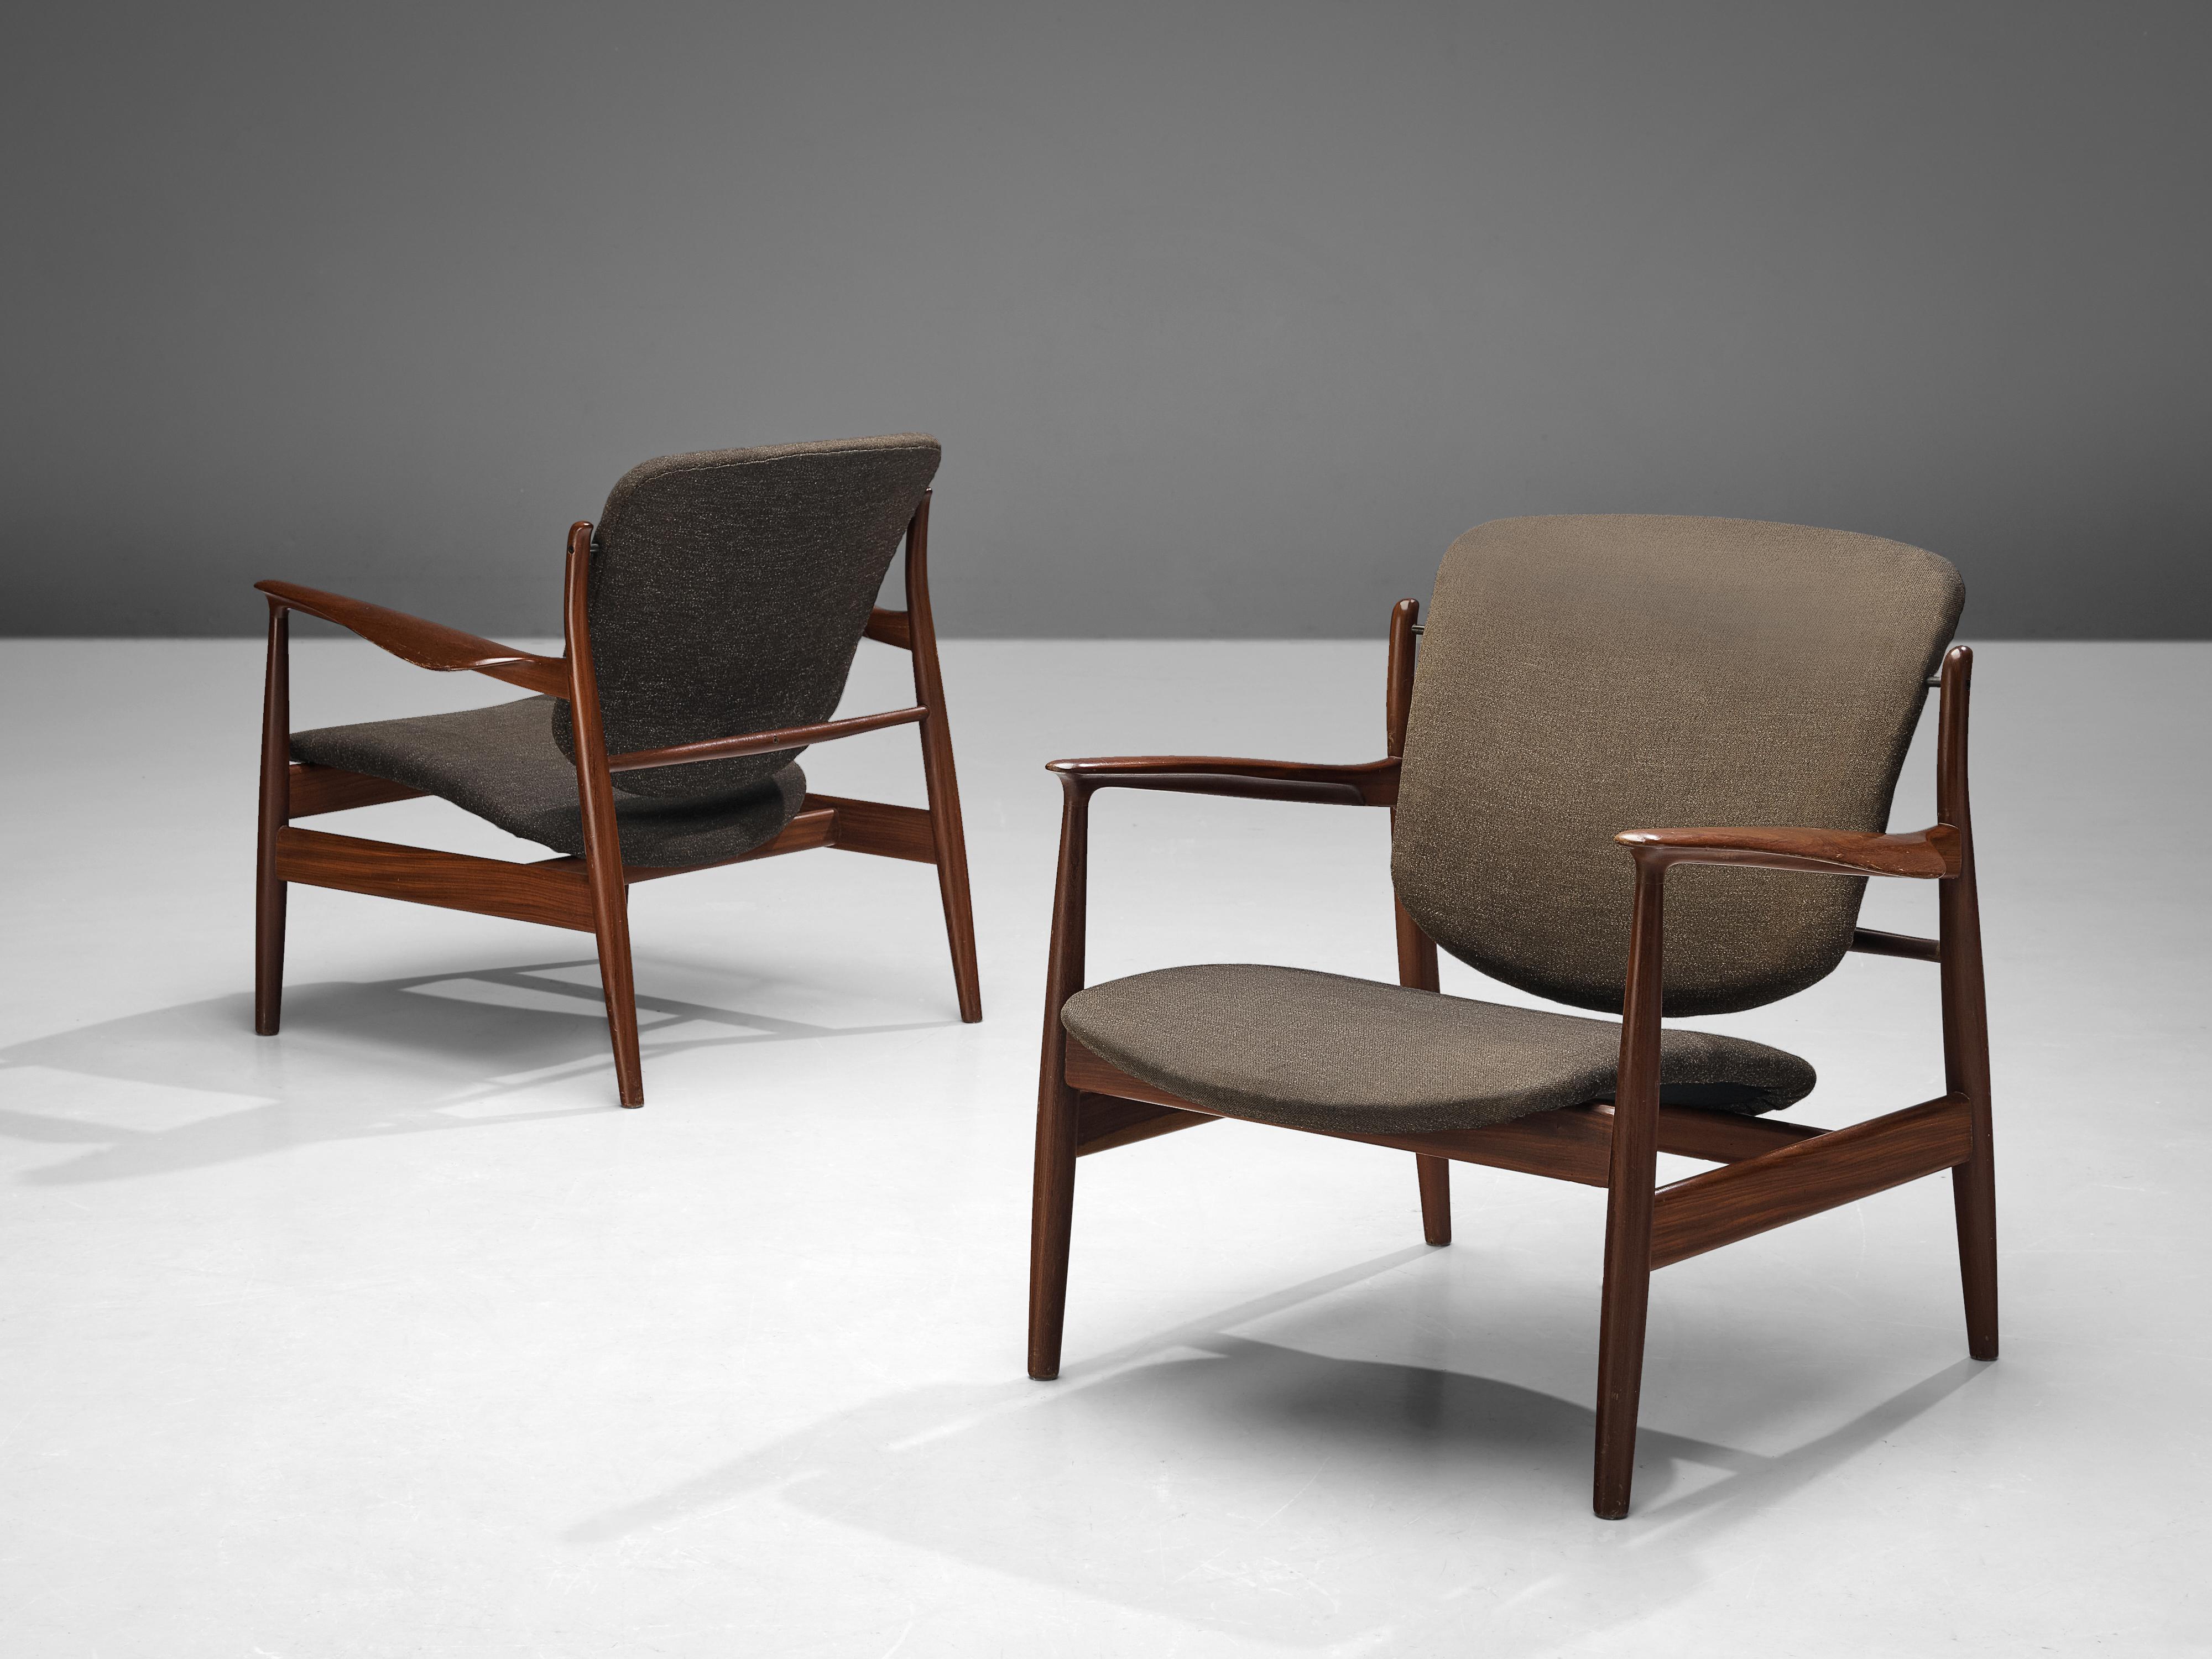 Finn Juhl for France & Søn, pair of lounge chairs early model '136', teak, fabric upholstery, Denmark, 1959. 

Very honest and open design by the Danish architect and designer Finn Juhl. As a lot of his designs, this chair as well shows its Danish